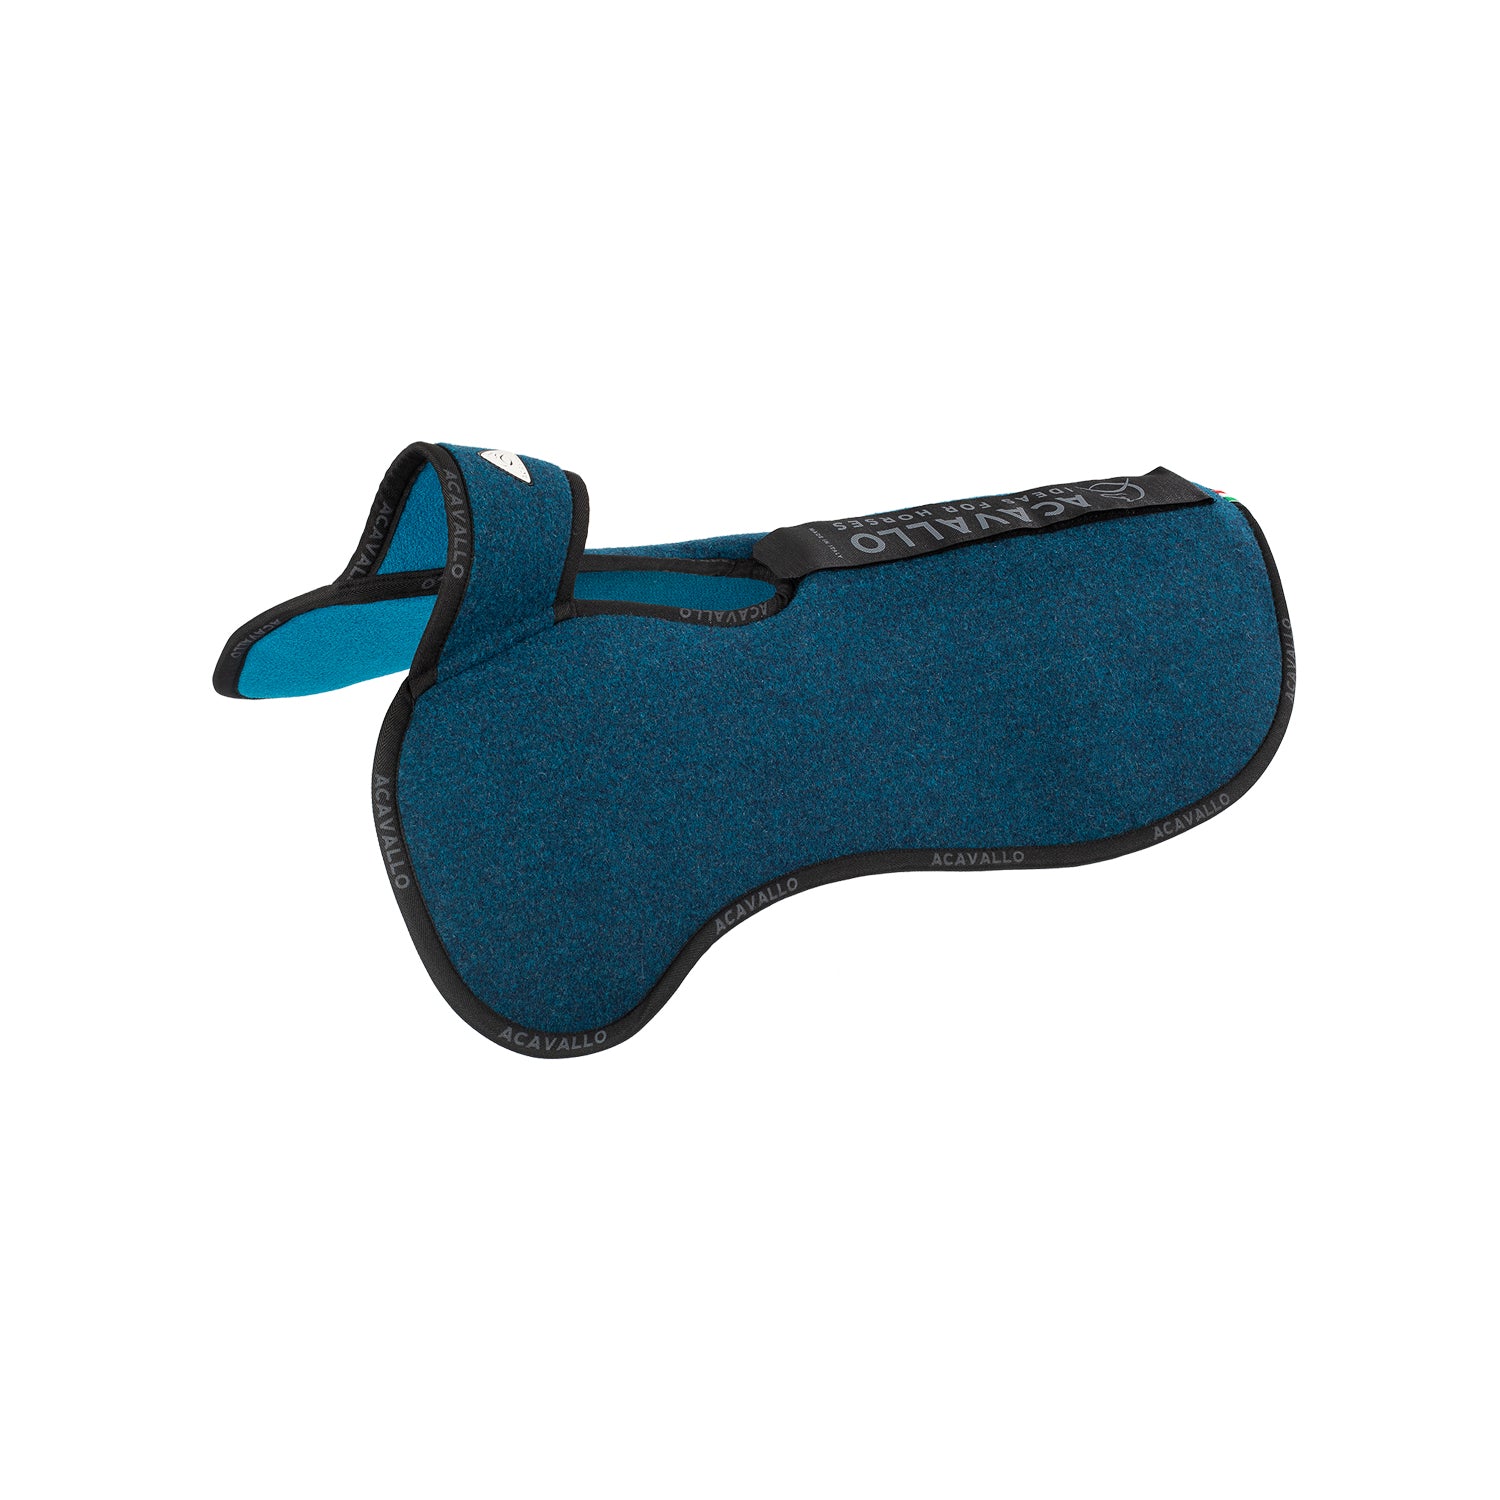 Pad WITHERS FREE BACK RISER CONFIGURATION WITH DOUBLE FELT - Reitstiefel Kandel - Dein Reitshop